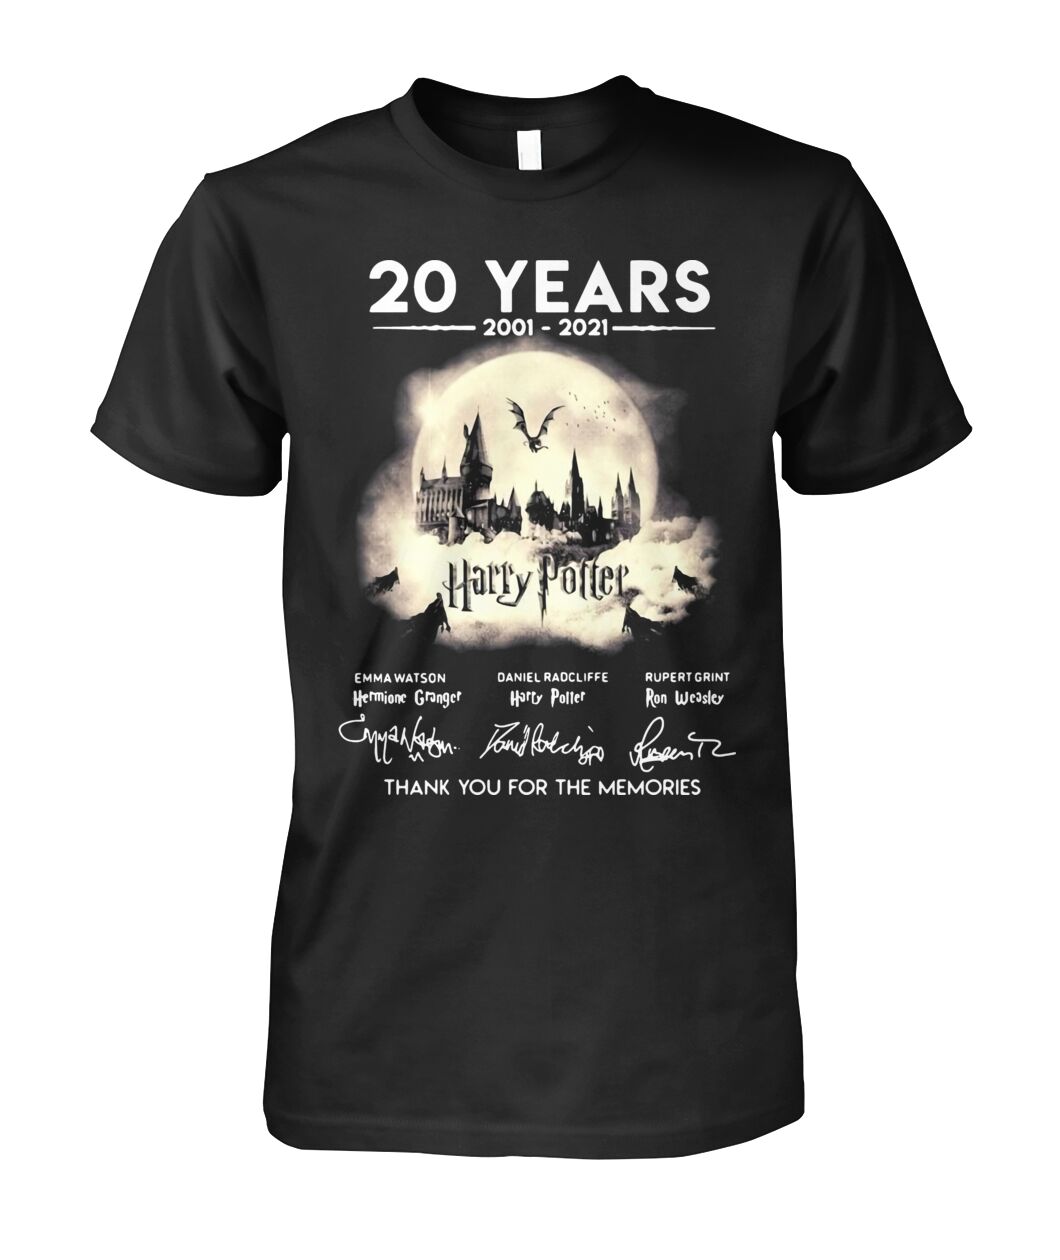 20 years Harry Potter thank you for the memories shirt, long sleeve tee and tank top